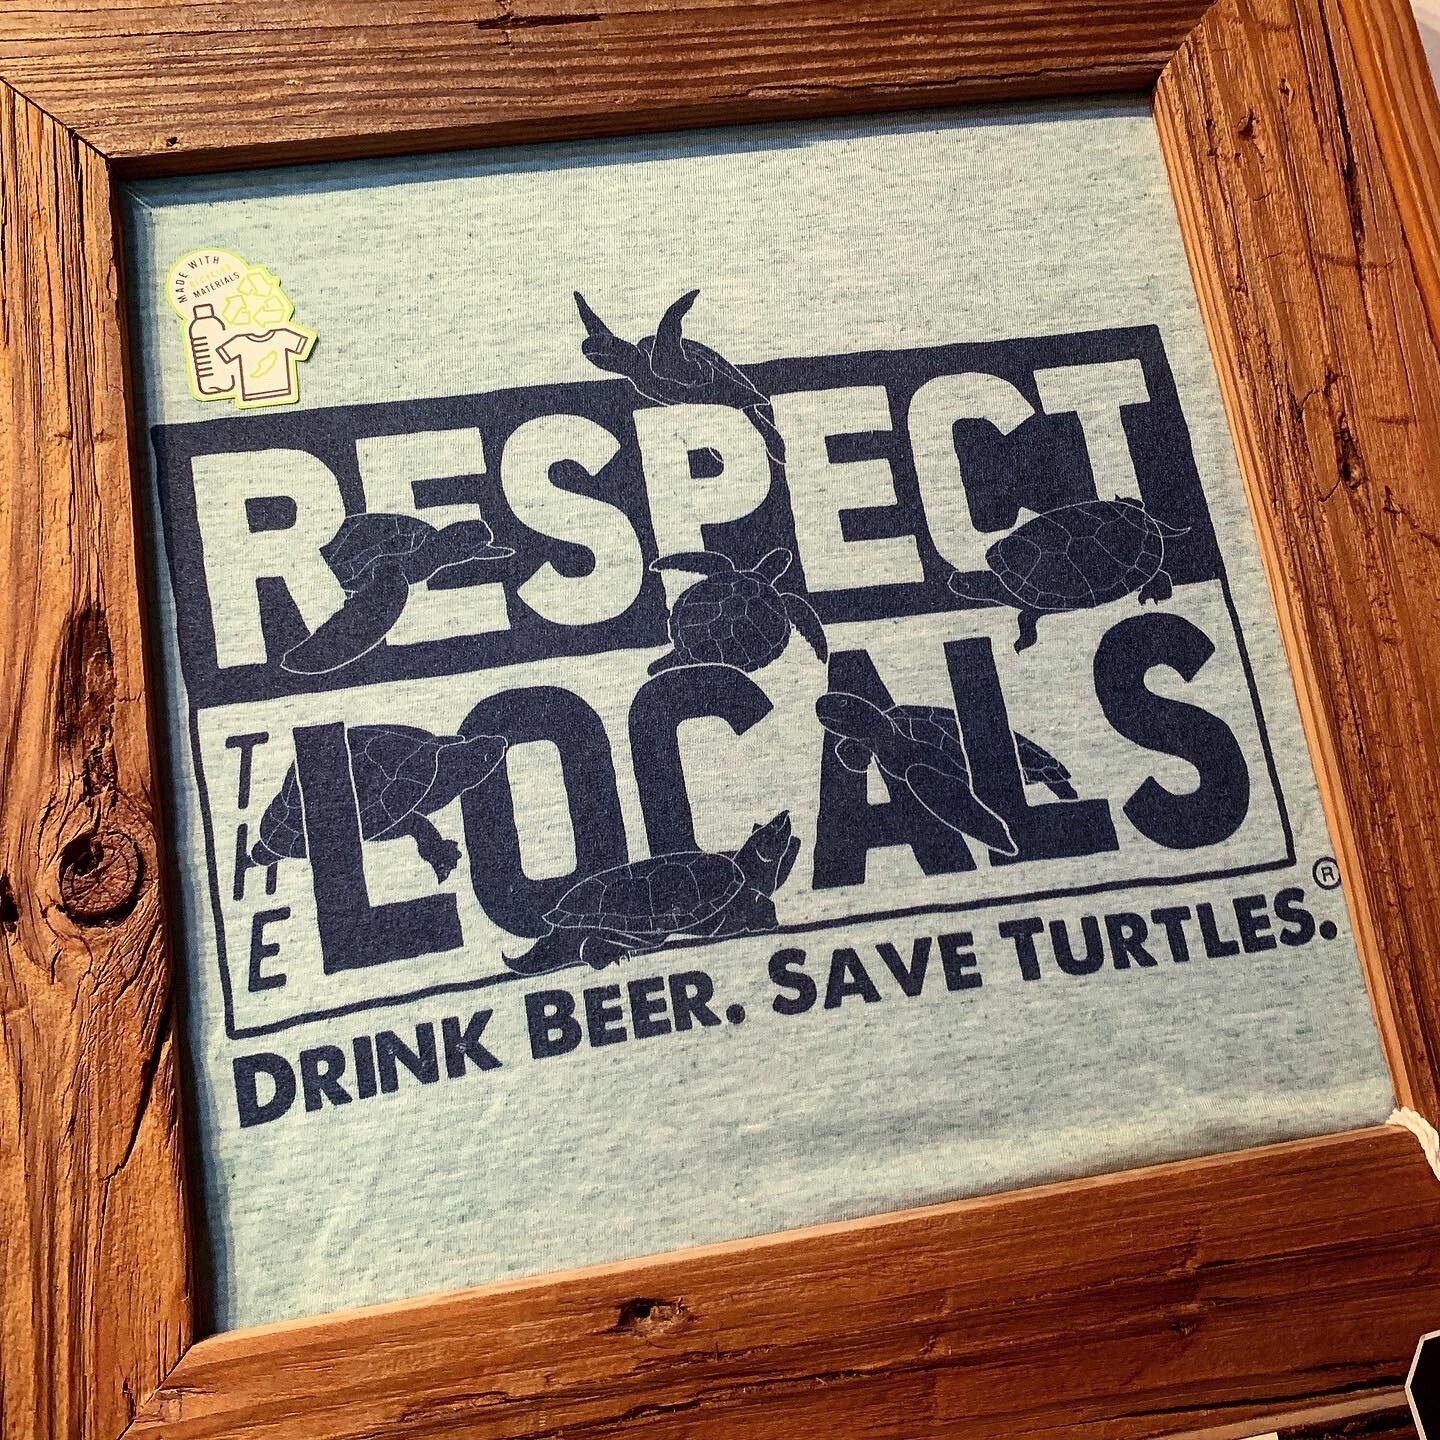 Respect the Locals: Drink Beer. Save Turtles.®